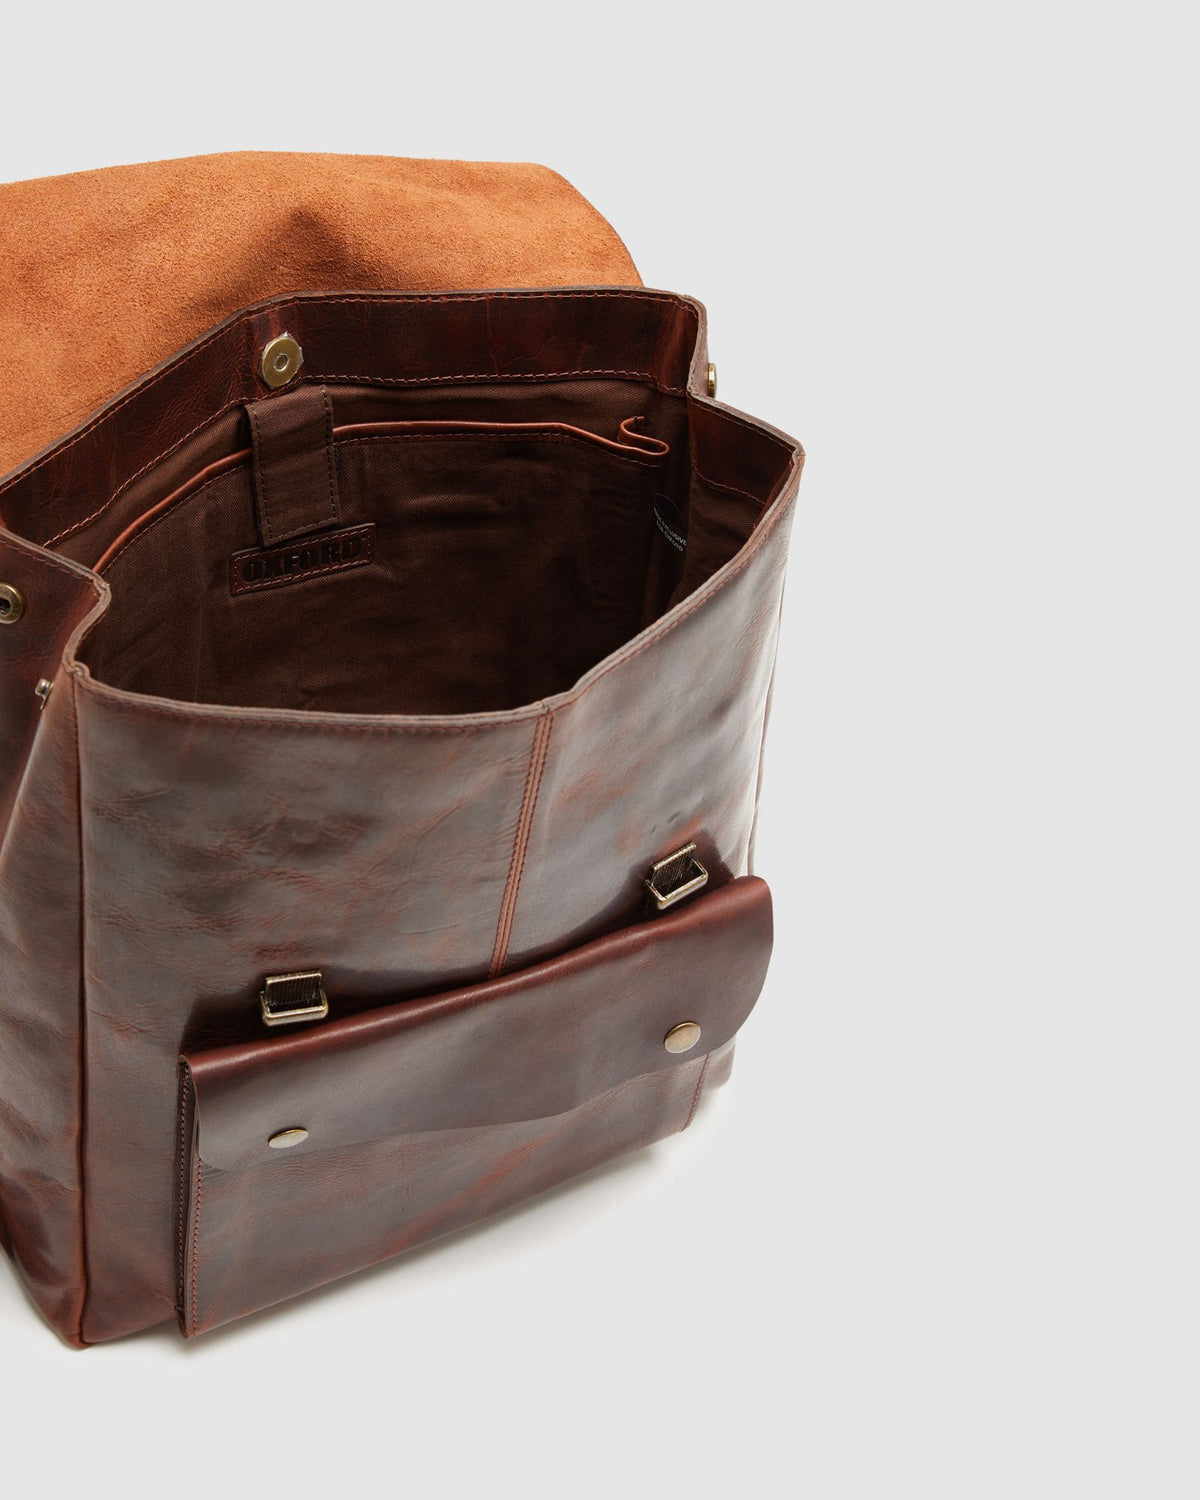 Male Brown Leather Backpack, Size: 14 X 23 X 6 In inch